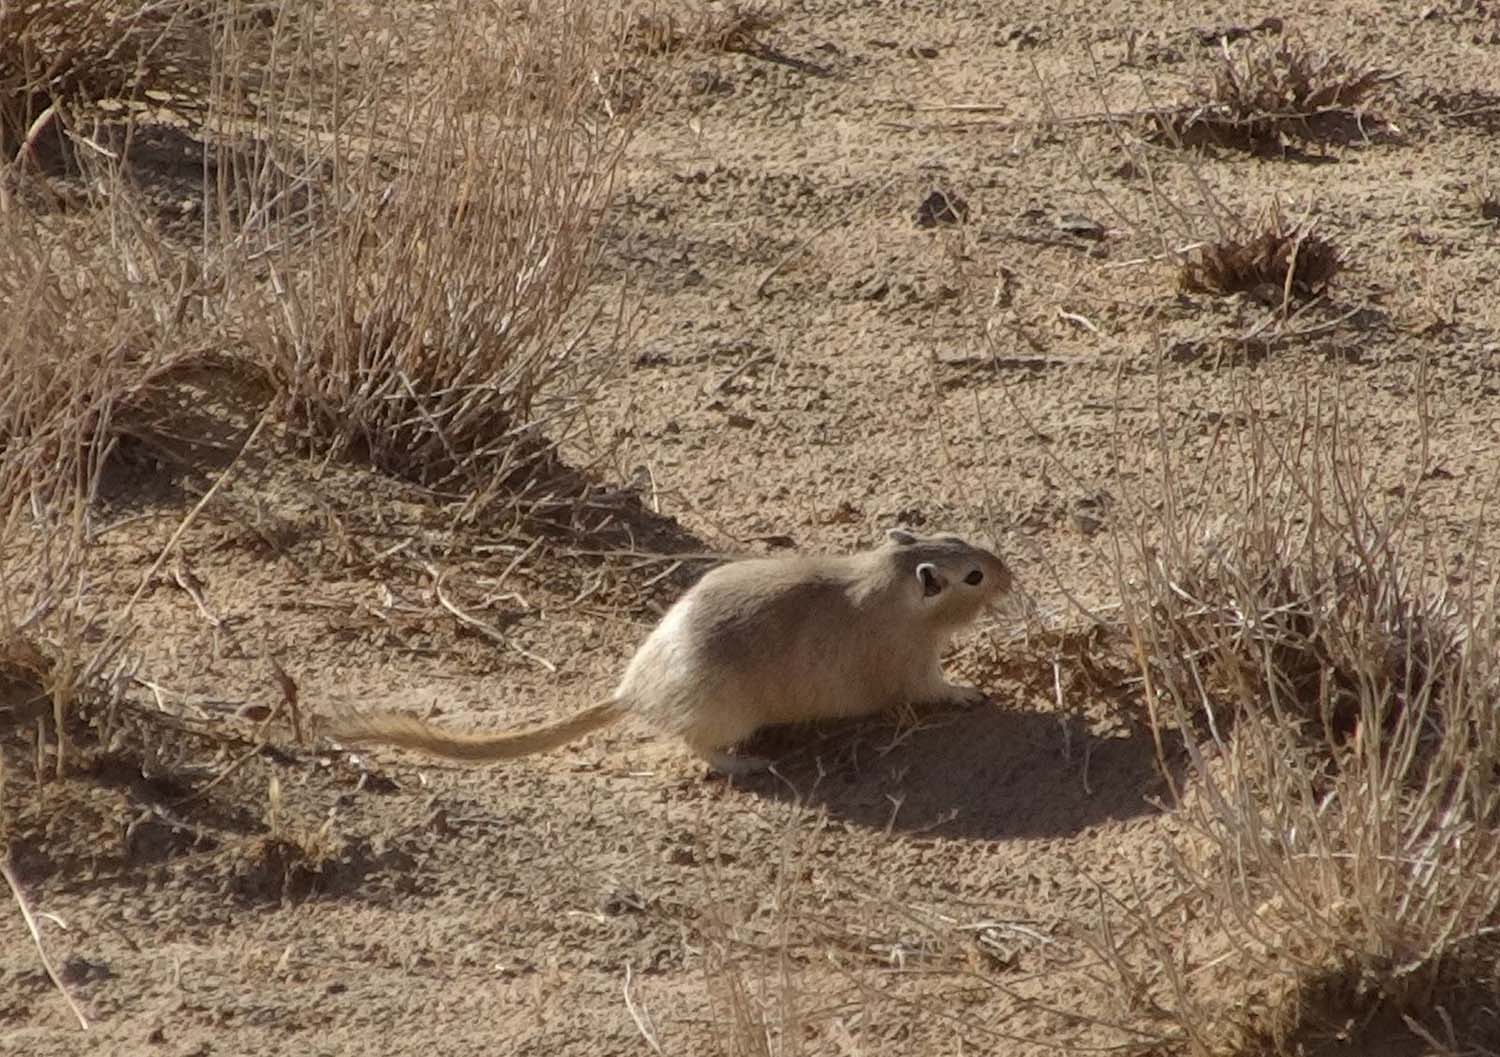 one of many ground squirrels in the desert